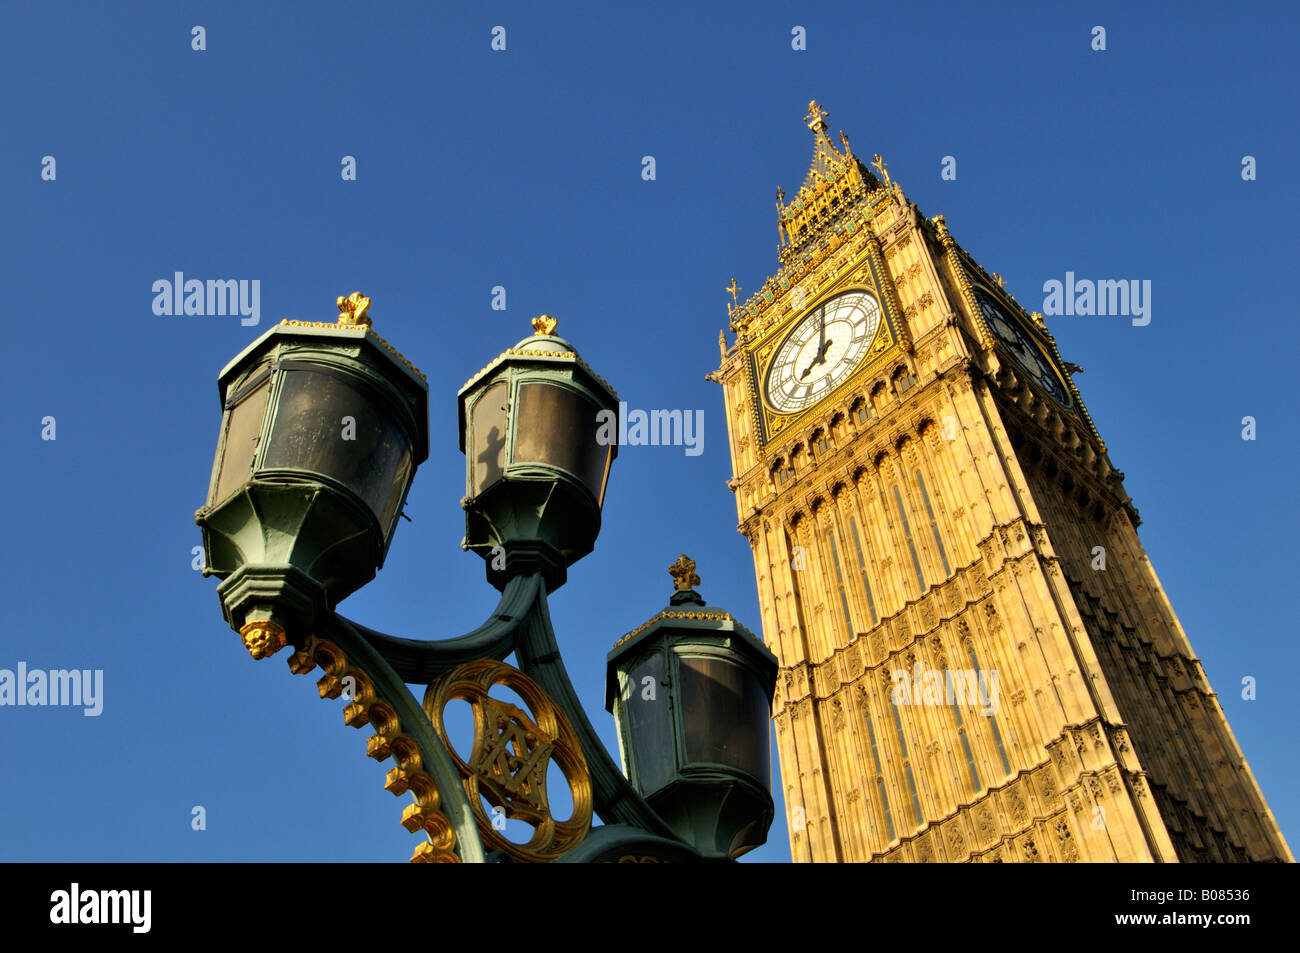 Palace of Westminster Parliament London United Kingdom Stock Photo